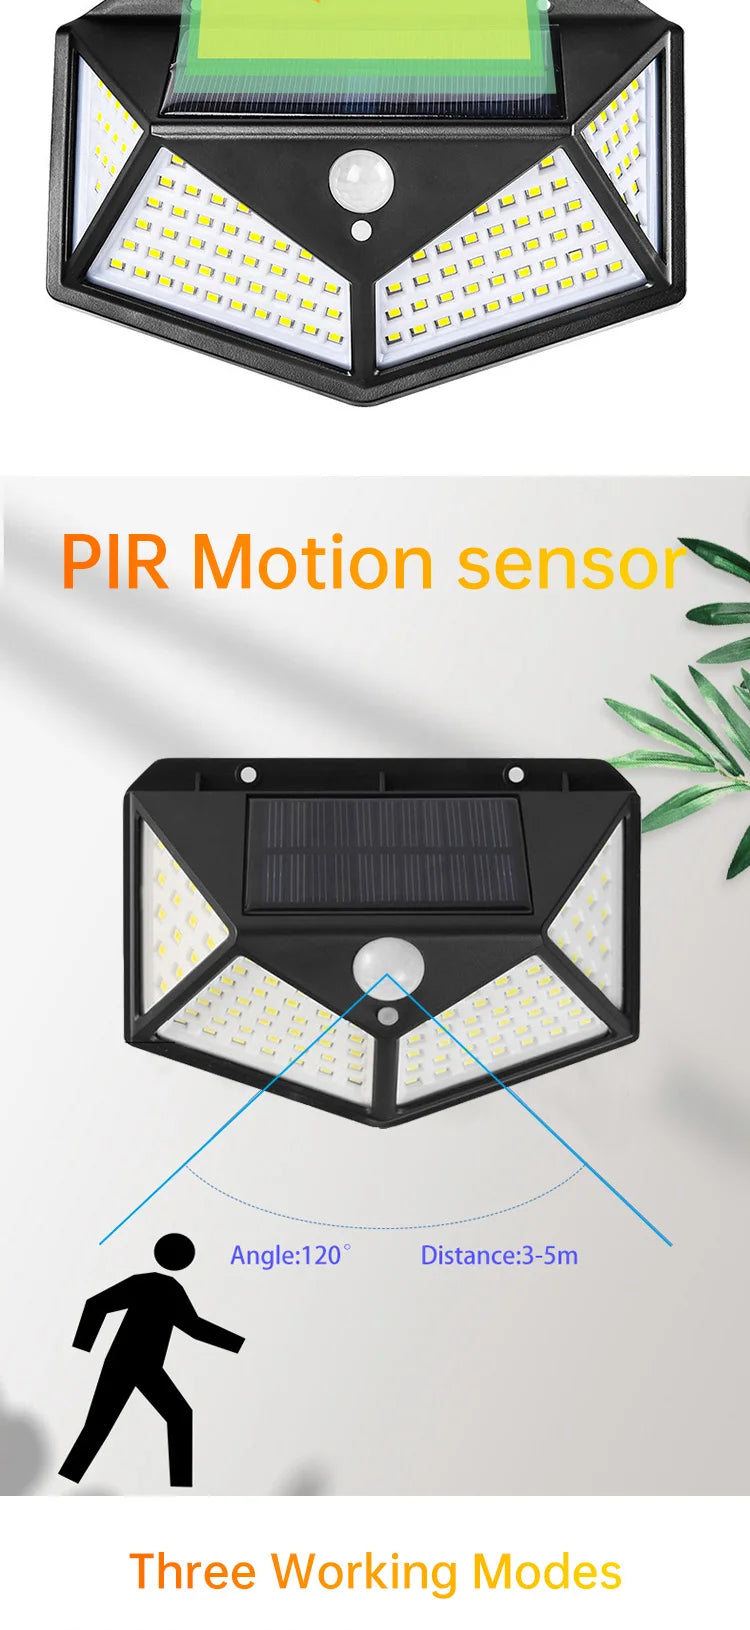 Motion sensor angle: 120°; detection distance: 3-5m; operates in three modes.